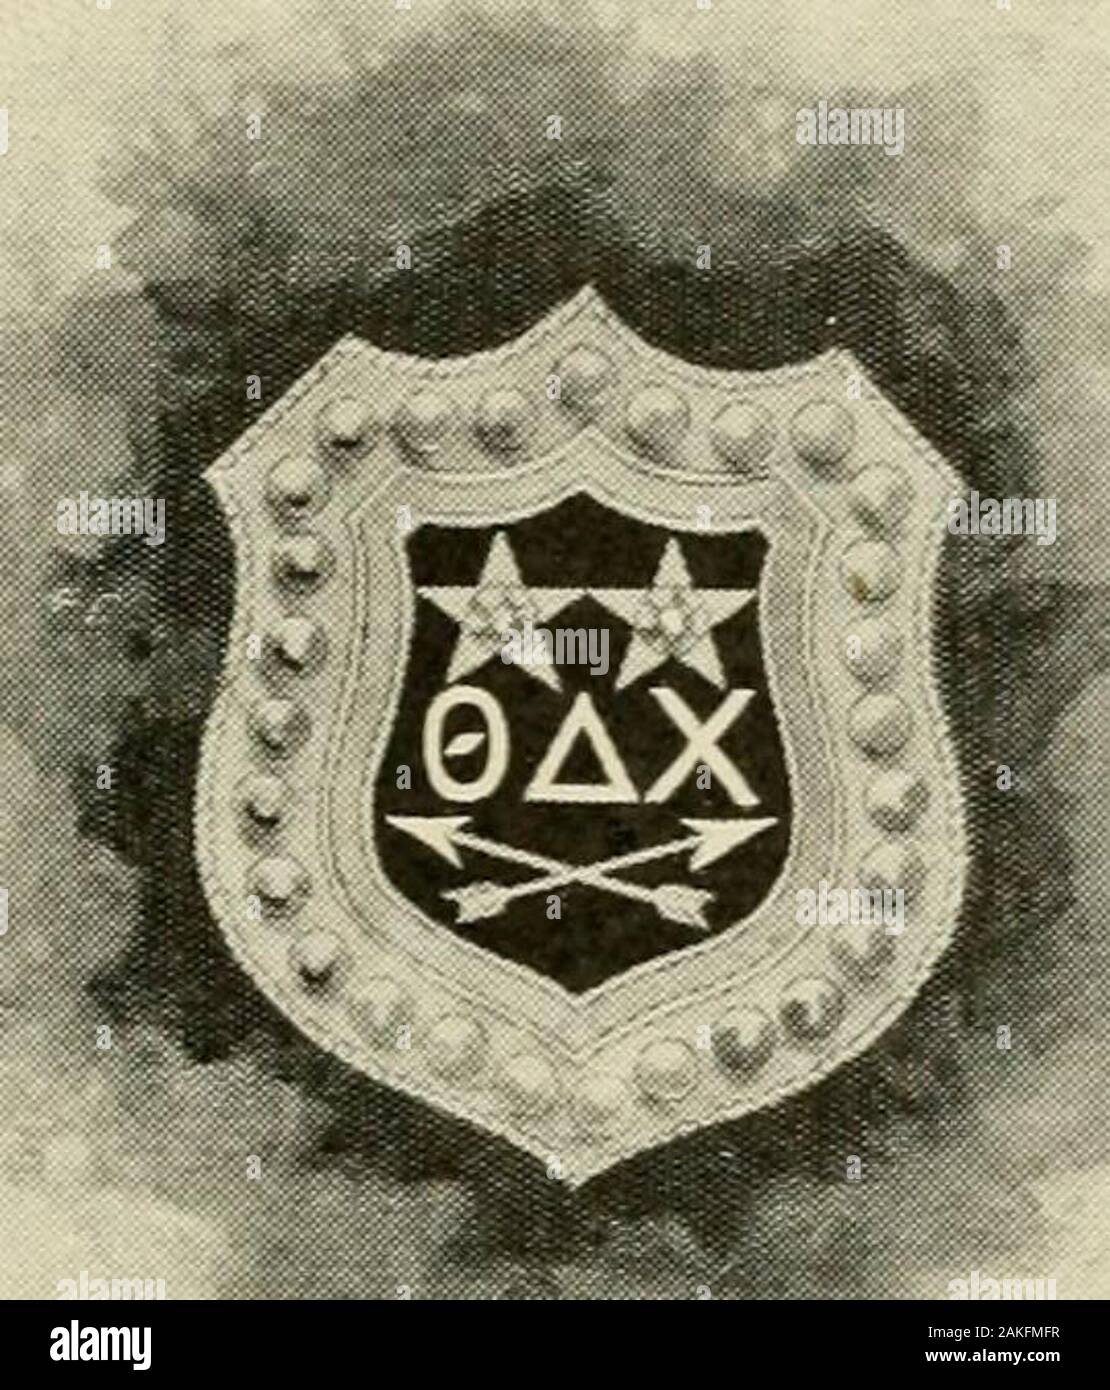 Greek letter men of Philadelphia . R. Francis Wood Francis Lanier Potts. THETA DELTA CHI THE Theta Delta Chi Fraternity was founded at Union College in 1848.The founders were. Akin, Beach, Brown, Green, Hyslop and Wile, classof 1849. Hon. Allen C. Beach, Ex-Lieutenant Governor of New York, andGeneral William S. Hillyer of General Grants Staff were Theta Delts fromsame class. For twenty years the Alpha Charge governed the Fraternity,granting charters and exercising the usual functions of the parent chapter. The original badge was a shield differing but slightly from the presentofficial badge se Stock Photo